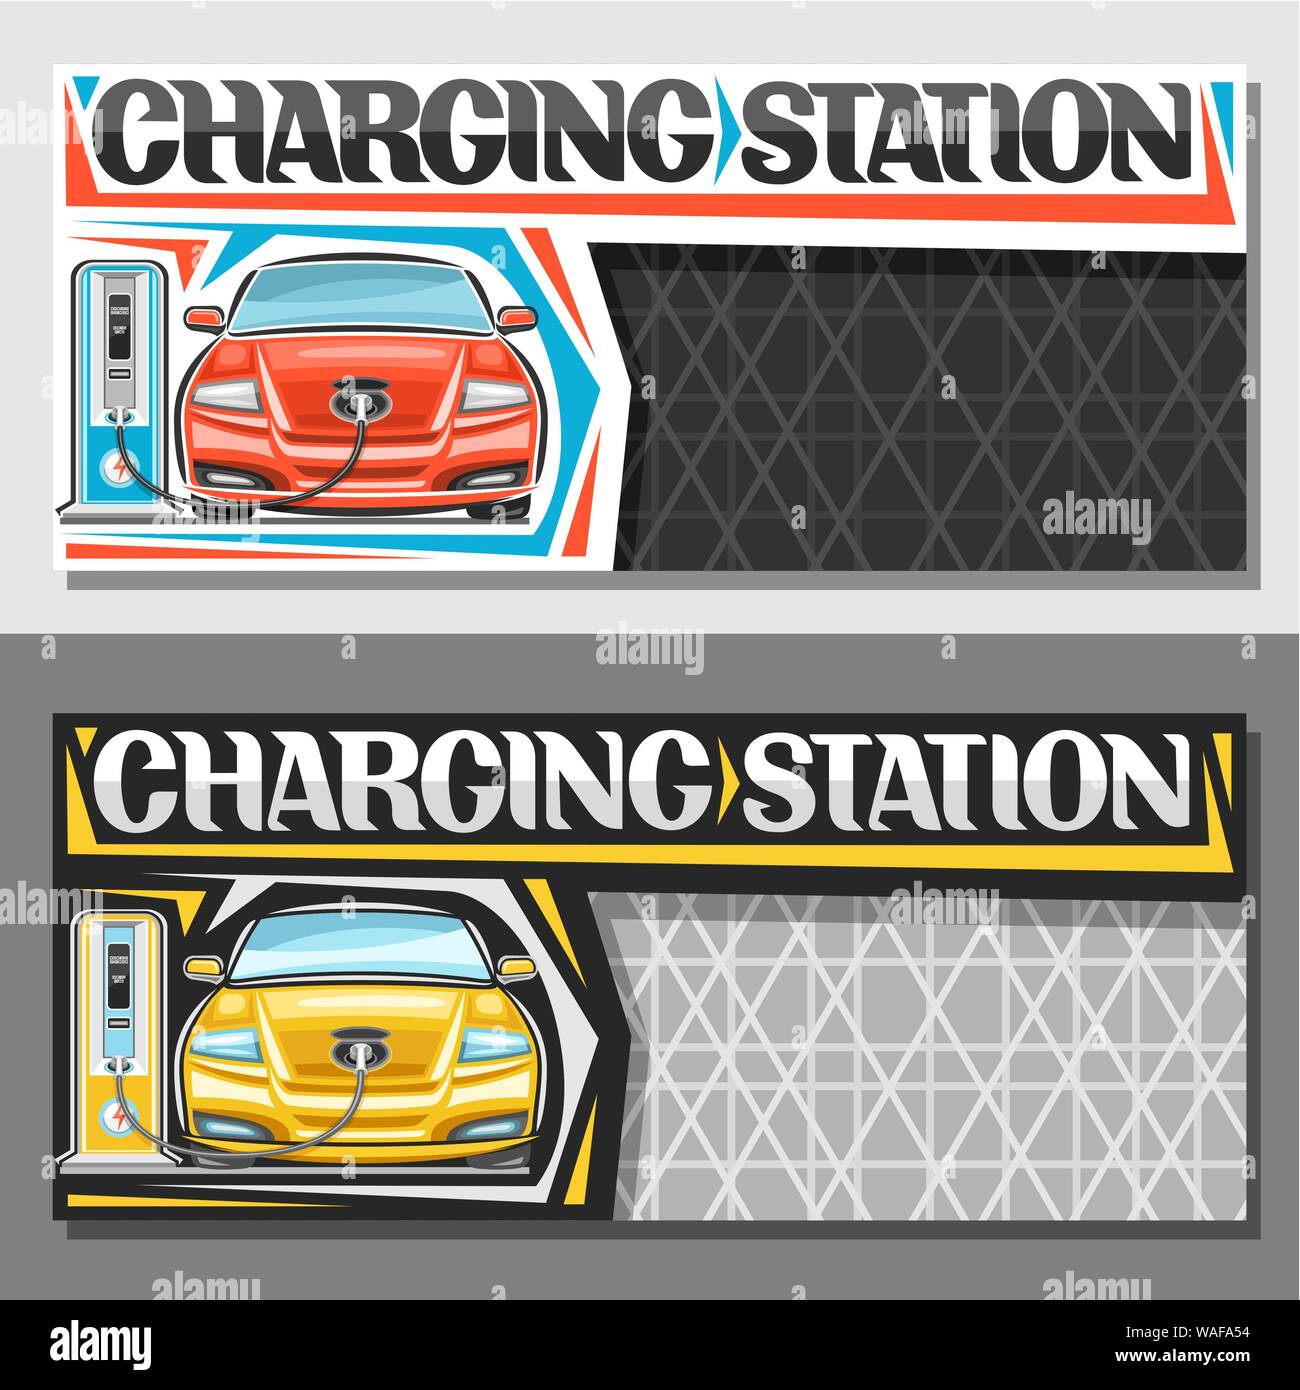 Vector layouts for Electric Car Charging Station with copy space on cells, signboard with cartoon electric red and yellow vehicles loading in charger, Stock Vector